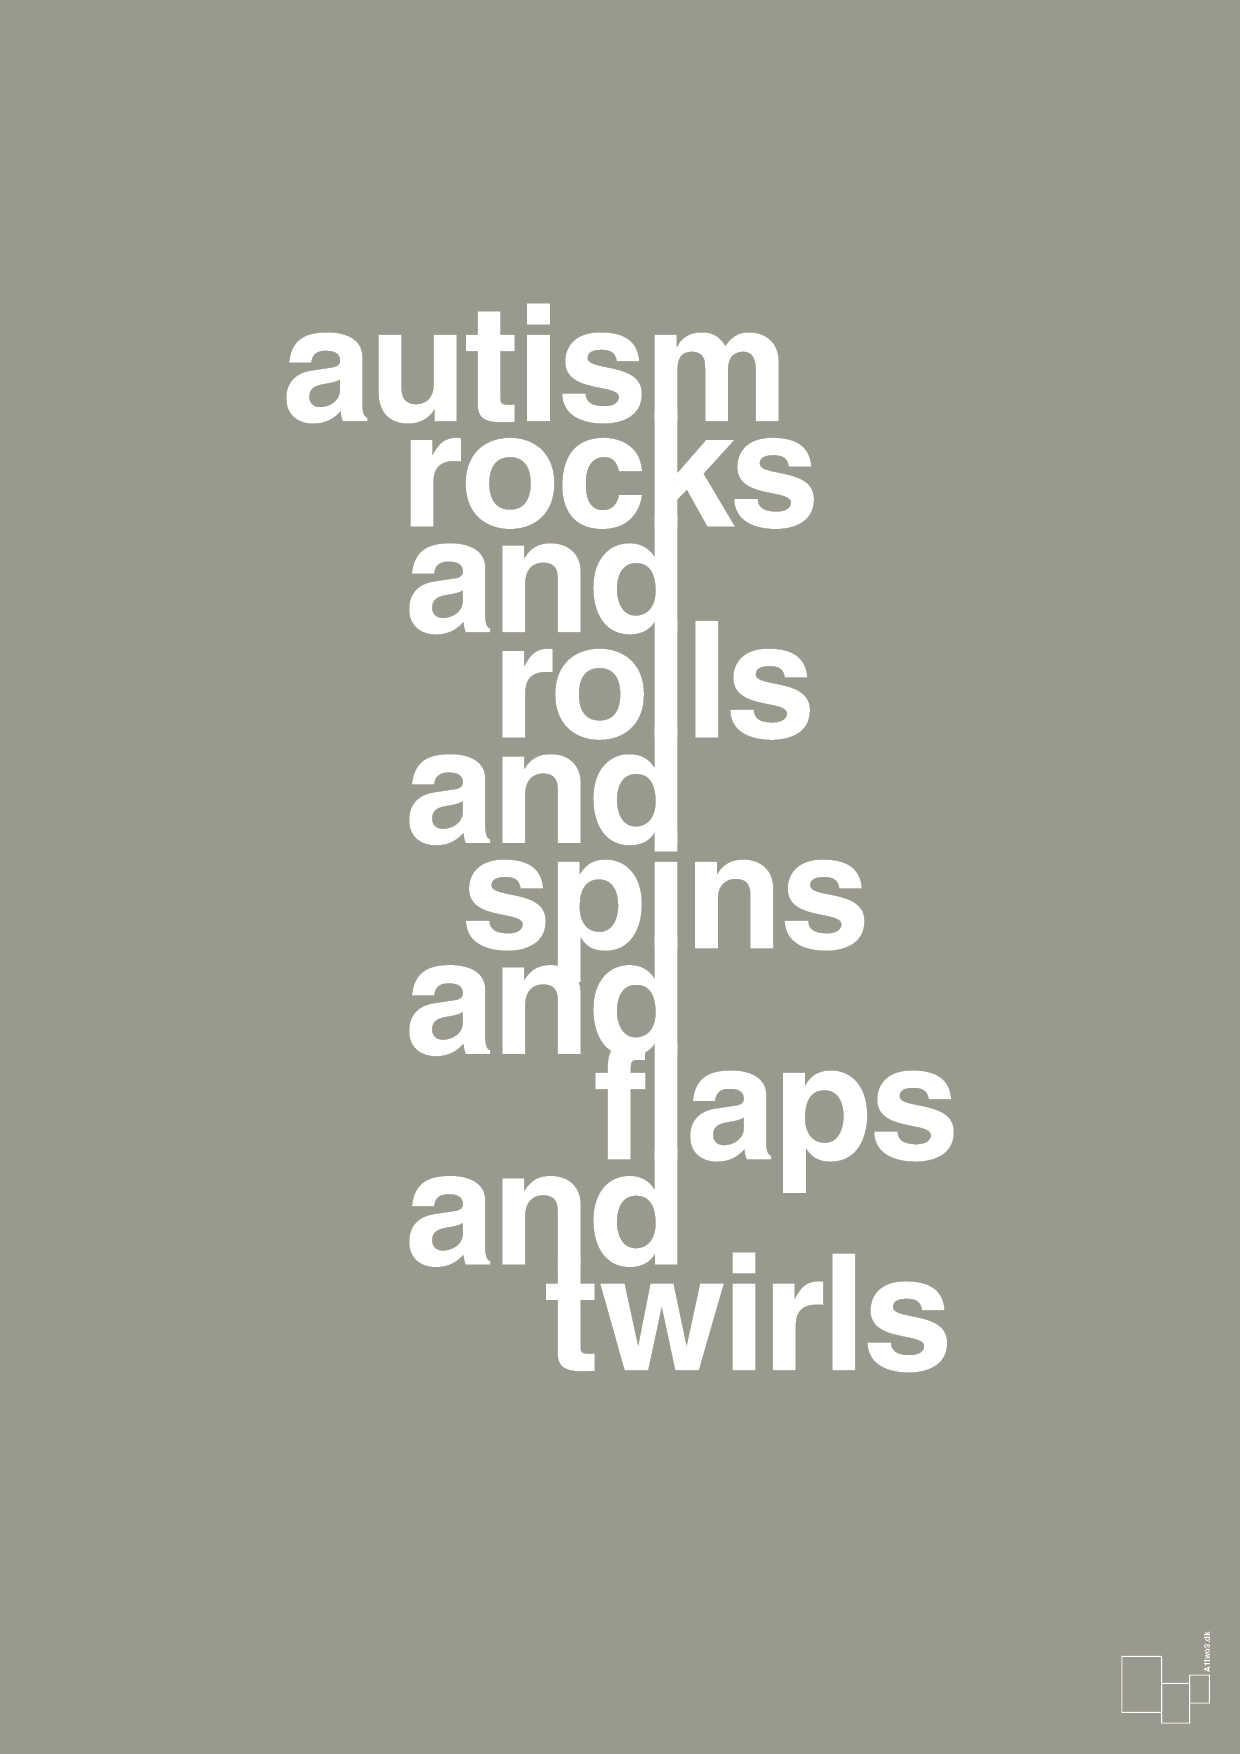 autism rocks and rolls and spins and flaps and twirls - Plakat med Samfund i Battleship Gray